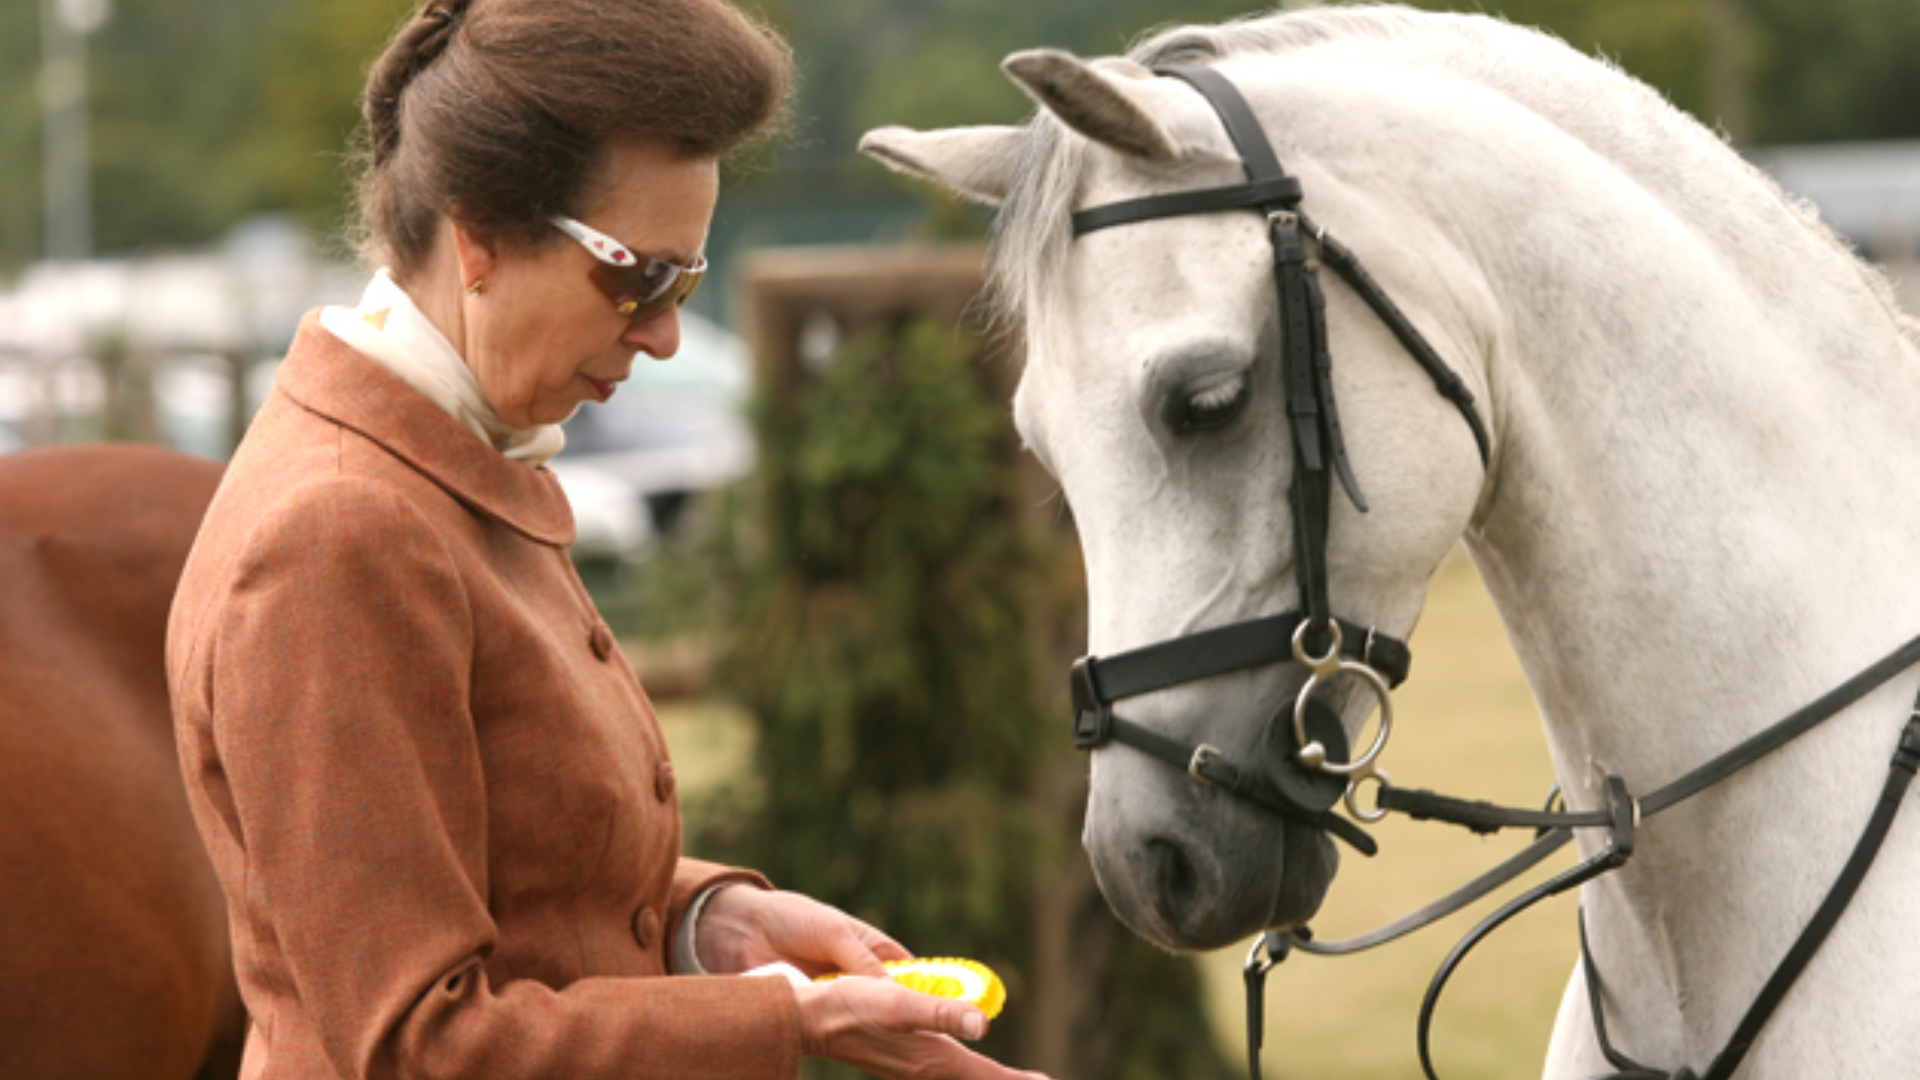 UK: Princess Anne Unexpected Accident, A Heartfelt Message After Missing Key Ceremony